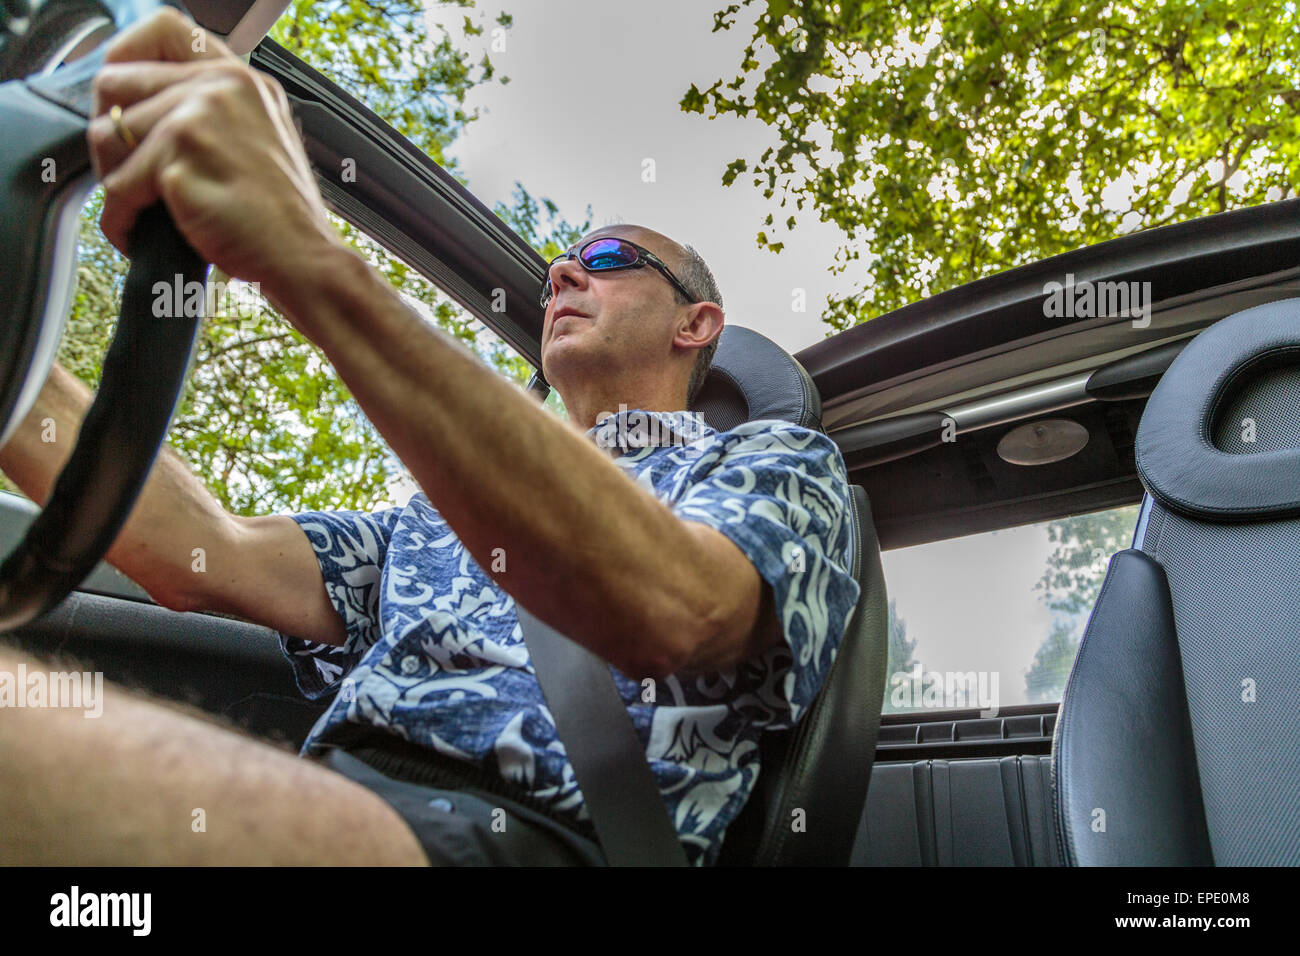 A middle aged man wearing sunglasses driving a Cabriolet car with the roof down on a summer day in Regents Park London England UK Stock Photo